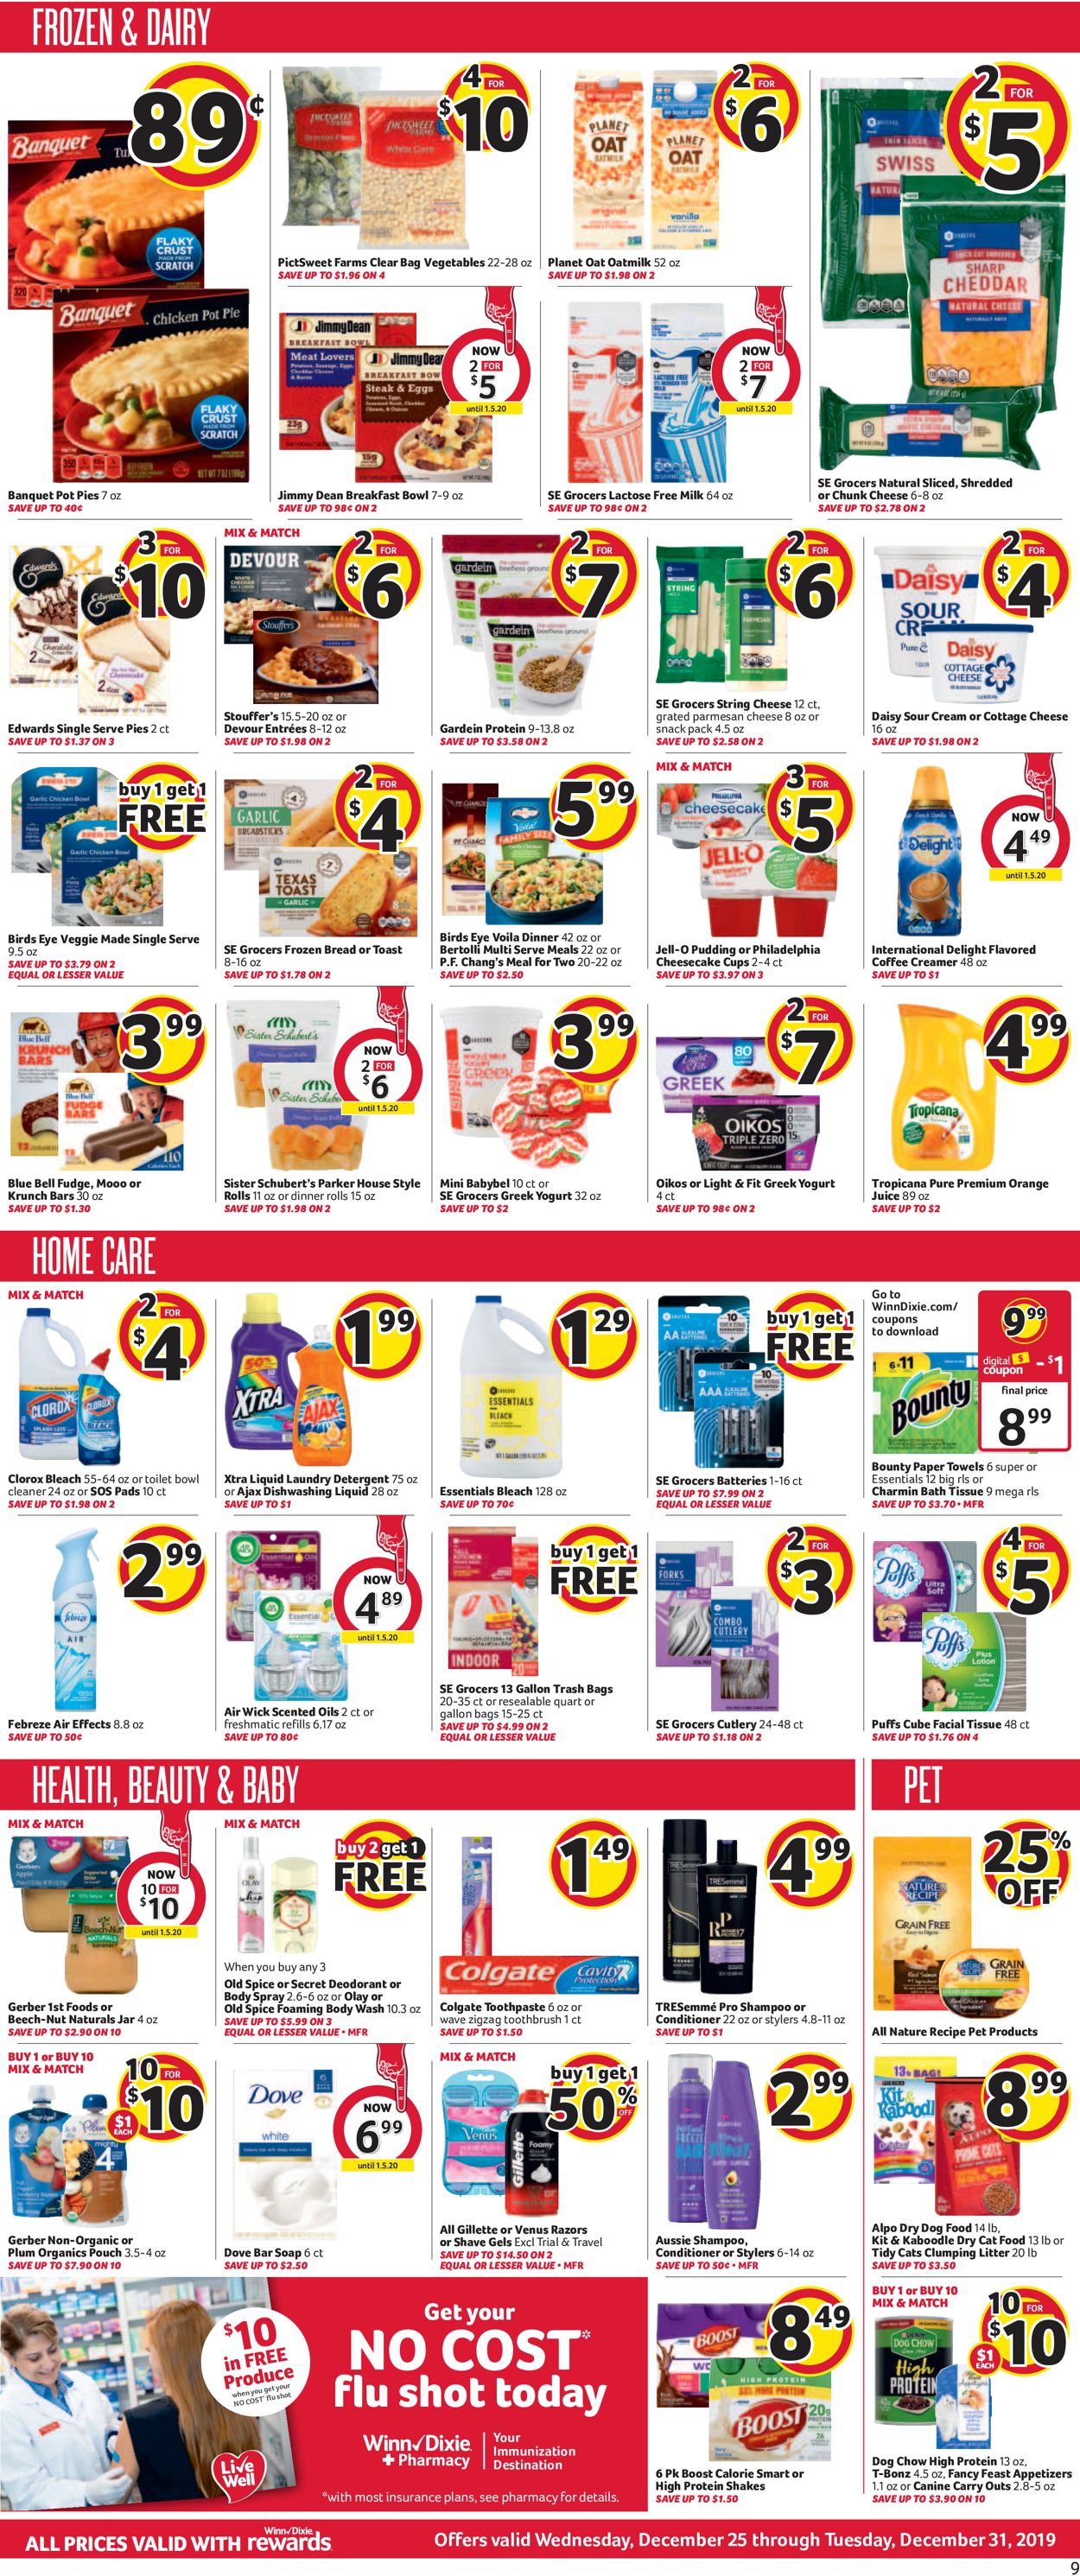 Winn Dixie - New Year's Ad 2019/2020 Current weekly ad 12/25 - 12/31 ...